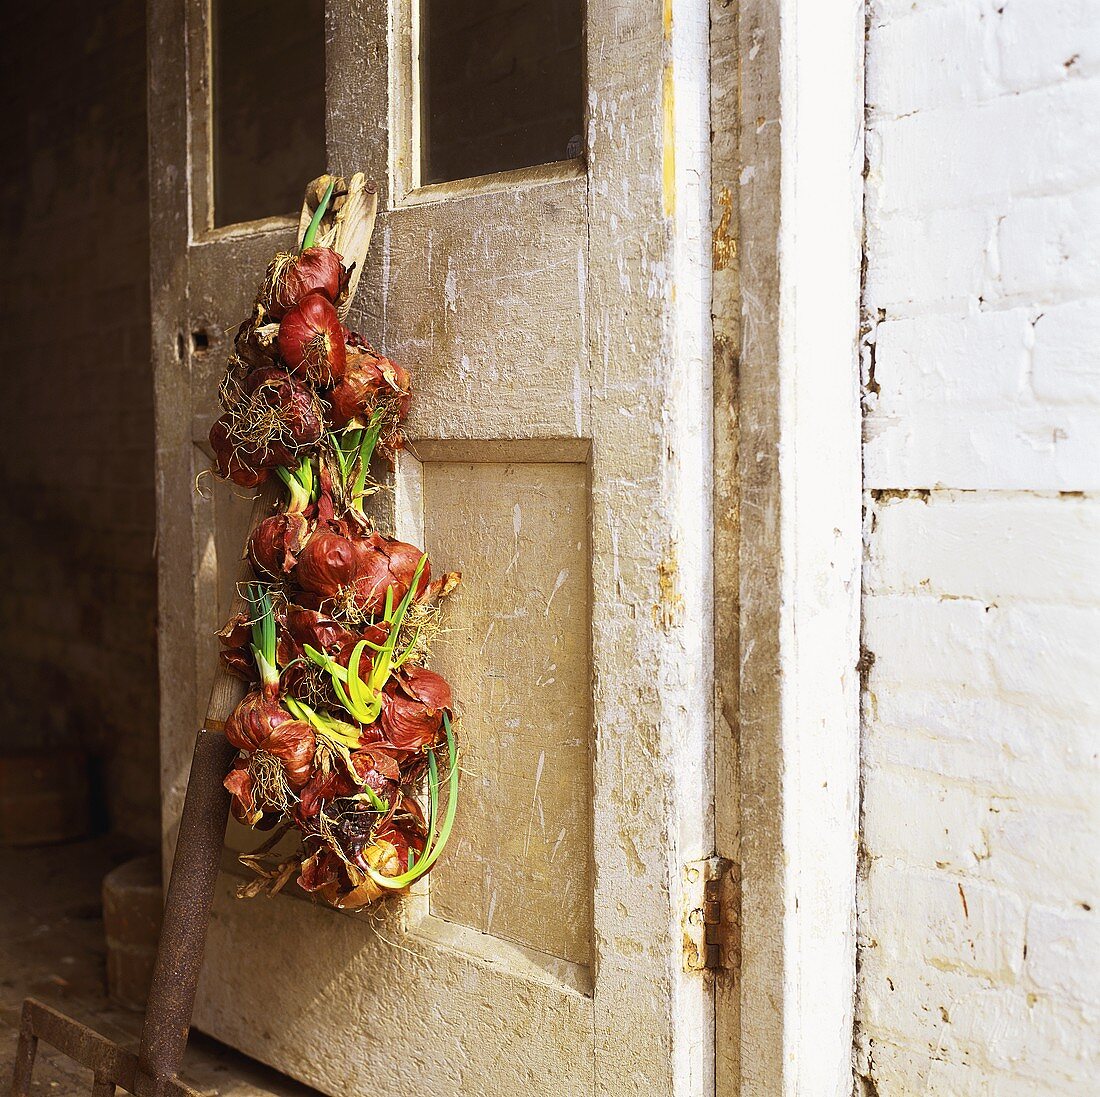 Red onions hanging on old door